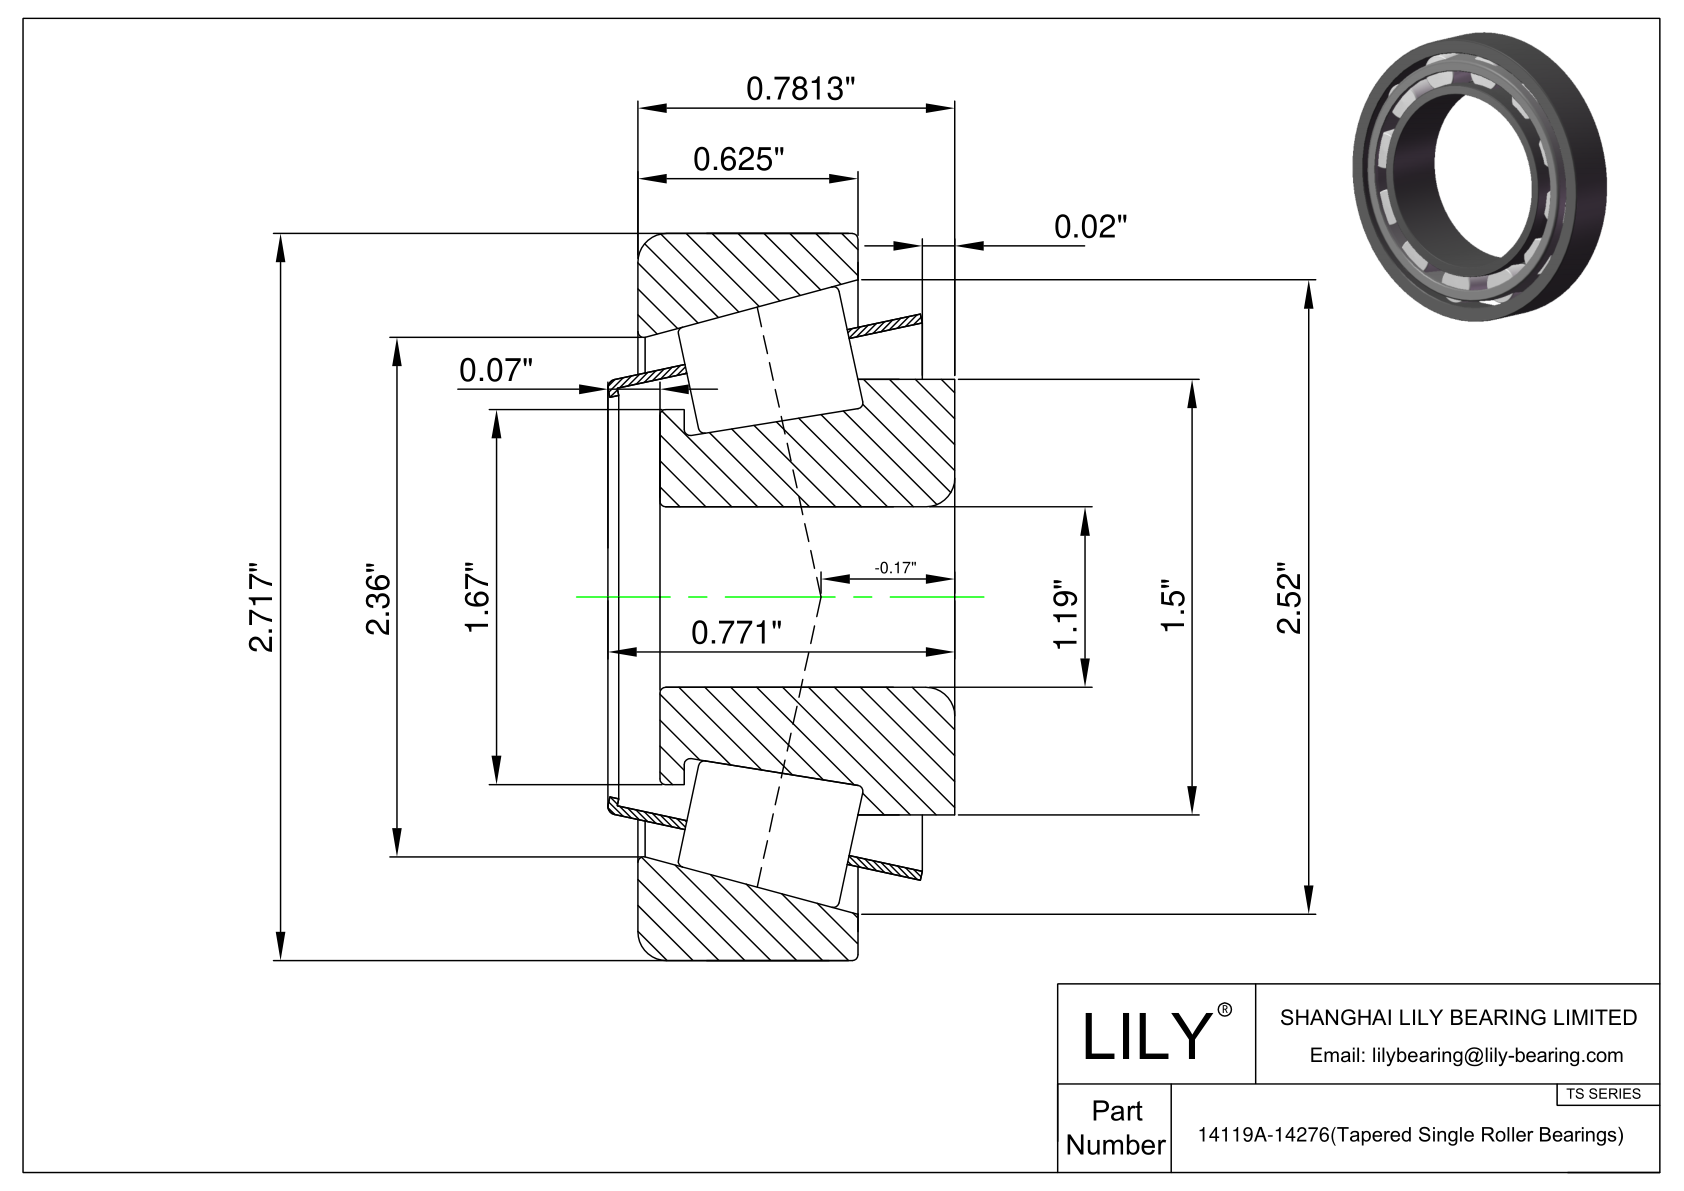 14119A-14276 TS (Tapered Single Roller Bearings) (Imperial) cad drawing